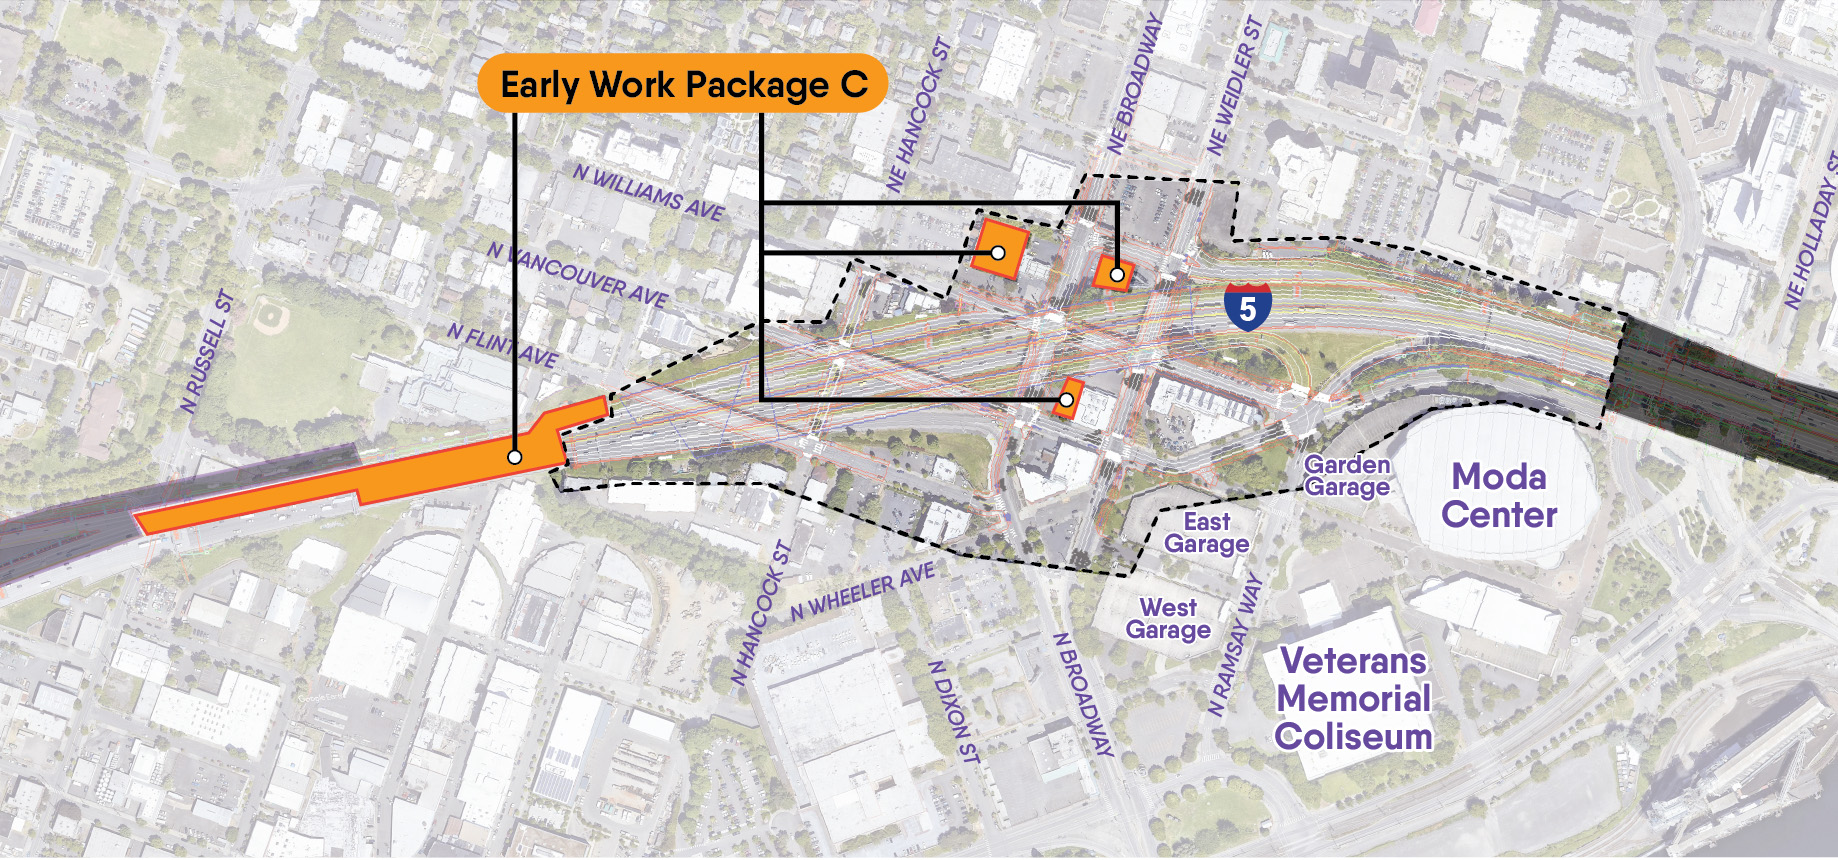 Map rendering showing Work Package C location